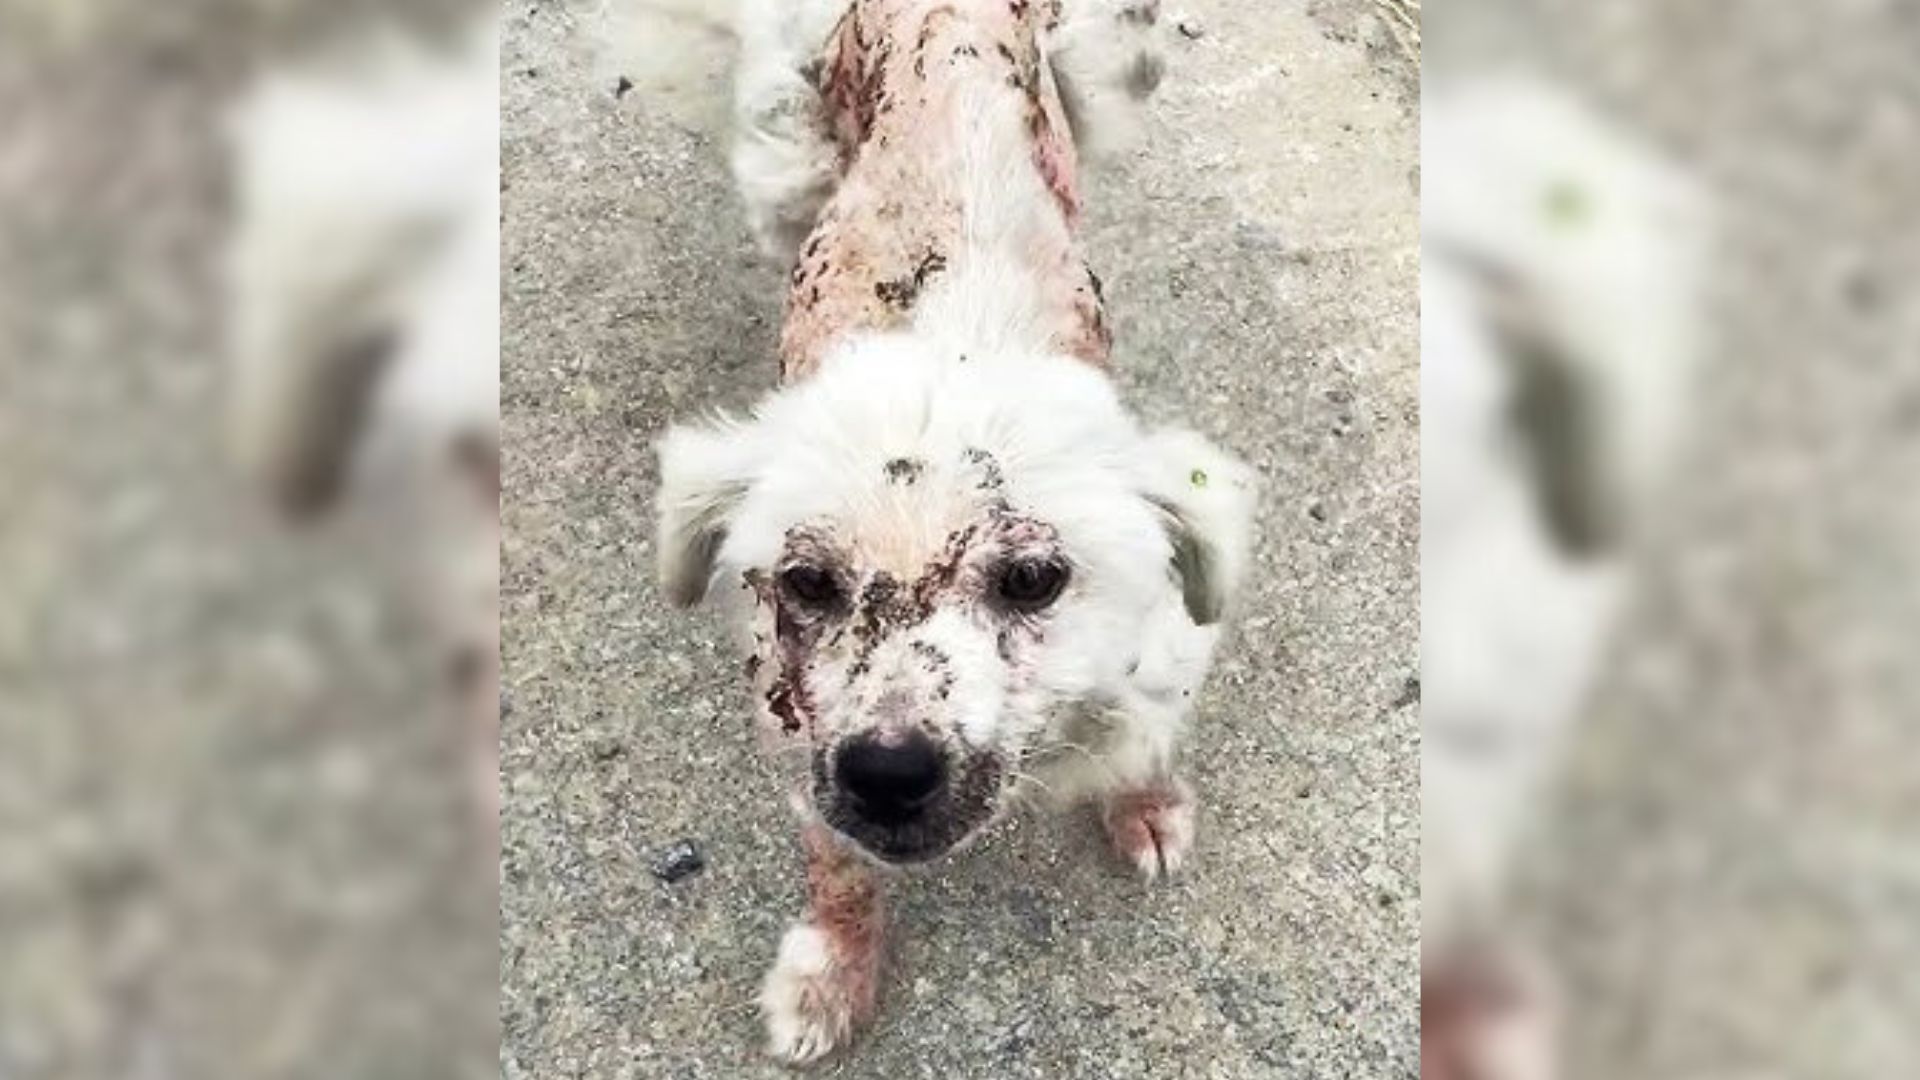 Woman Was Shocked When She Ran Into A Stray Dog All Covered In Bruises And Begged For Help